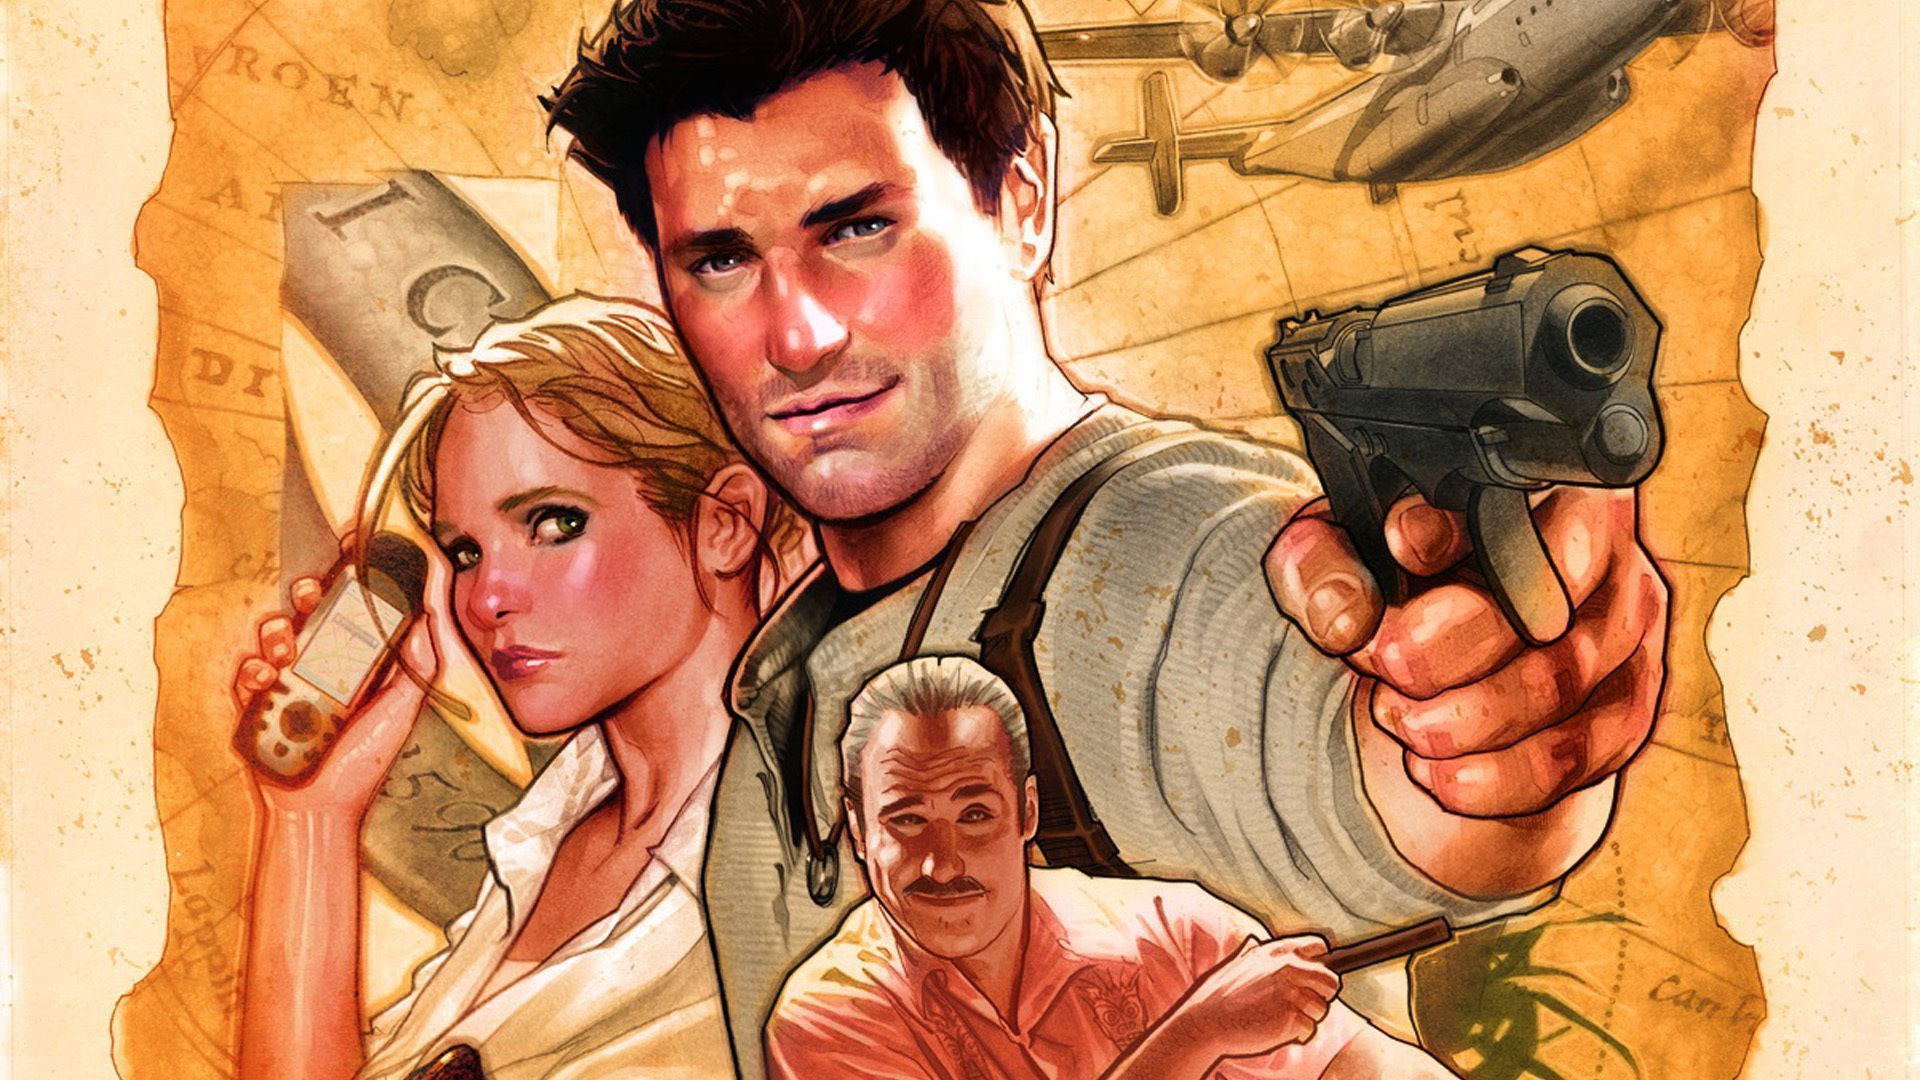 Uncharted wallpapers | WallpaperUP